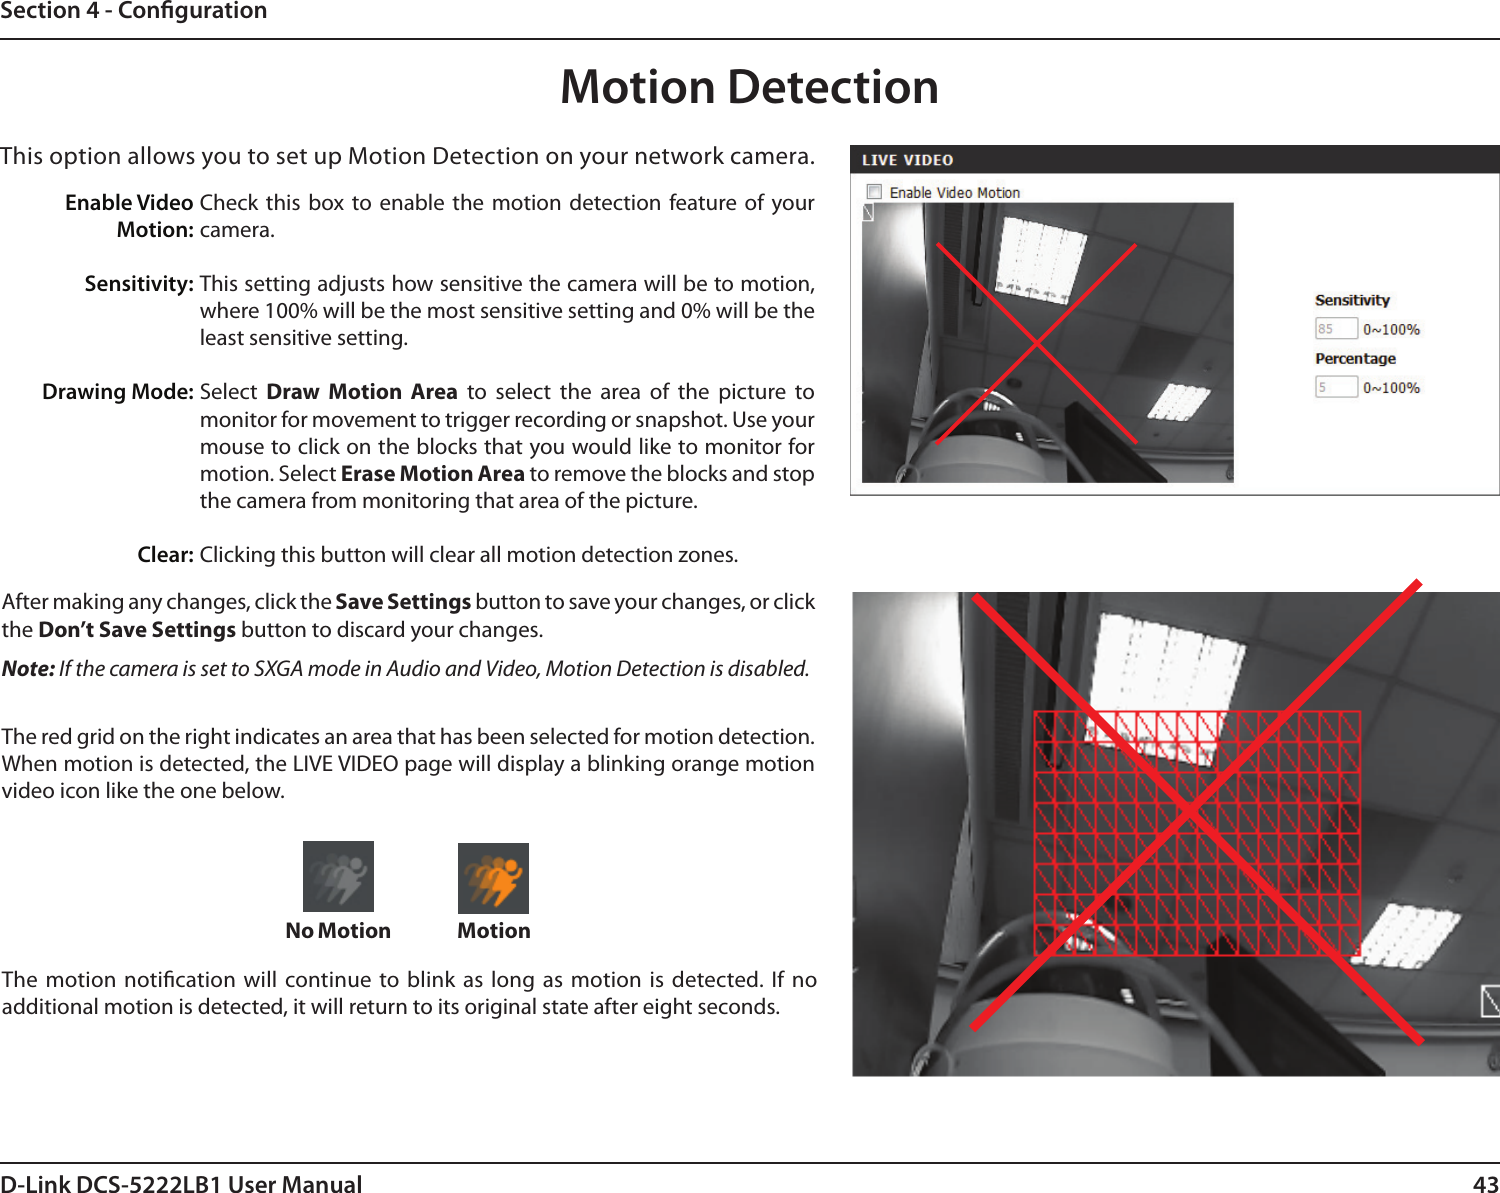 43D-Link DCS-5222LB1 User ManualSection 4 - CongurationMotion DetectionCheck  this  box  to  enable  the motion  detection  feature of  your camera.This setting adjusts how sensitive the camera will be to motion, where 100% will be the most sensitive setting and 0% will be the least sensitive setting.Select  Draw  Motion  Area  to  select  the  area  of  the  picture  to monitor for movement to trigger recording or snapshot. Use your mouse to click on the blocks that you would like to monitor for motion. Select Erase Motion Area to remove the blocks and stop the camera from monitoring that area of the picture.Clicking this button will clear all motion detection zones.This option allows you to set up Motion Detection on your network camera. Enable VideoMotion:Sensitivity:Drawing Mode: Clear:The motion notication will continue to blink as long  as  motion is detected. If  no additional motion is detected, it will return to its original state after eight seconds.After making any changes, click the Save Settings button to save your changes, or click the Don’t Save Settings button to discard your changes.Note: If the camera is set to SXGA mode in Audio and Video, Motion Detection is disabled.The red grid on the right indicates an area that has been selected for motion detection. When motion is detected, the LIVE VIDEO page will display a blinking orange motion video icon like the one below.MotionNo Motion